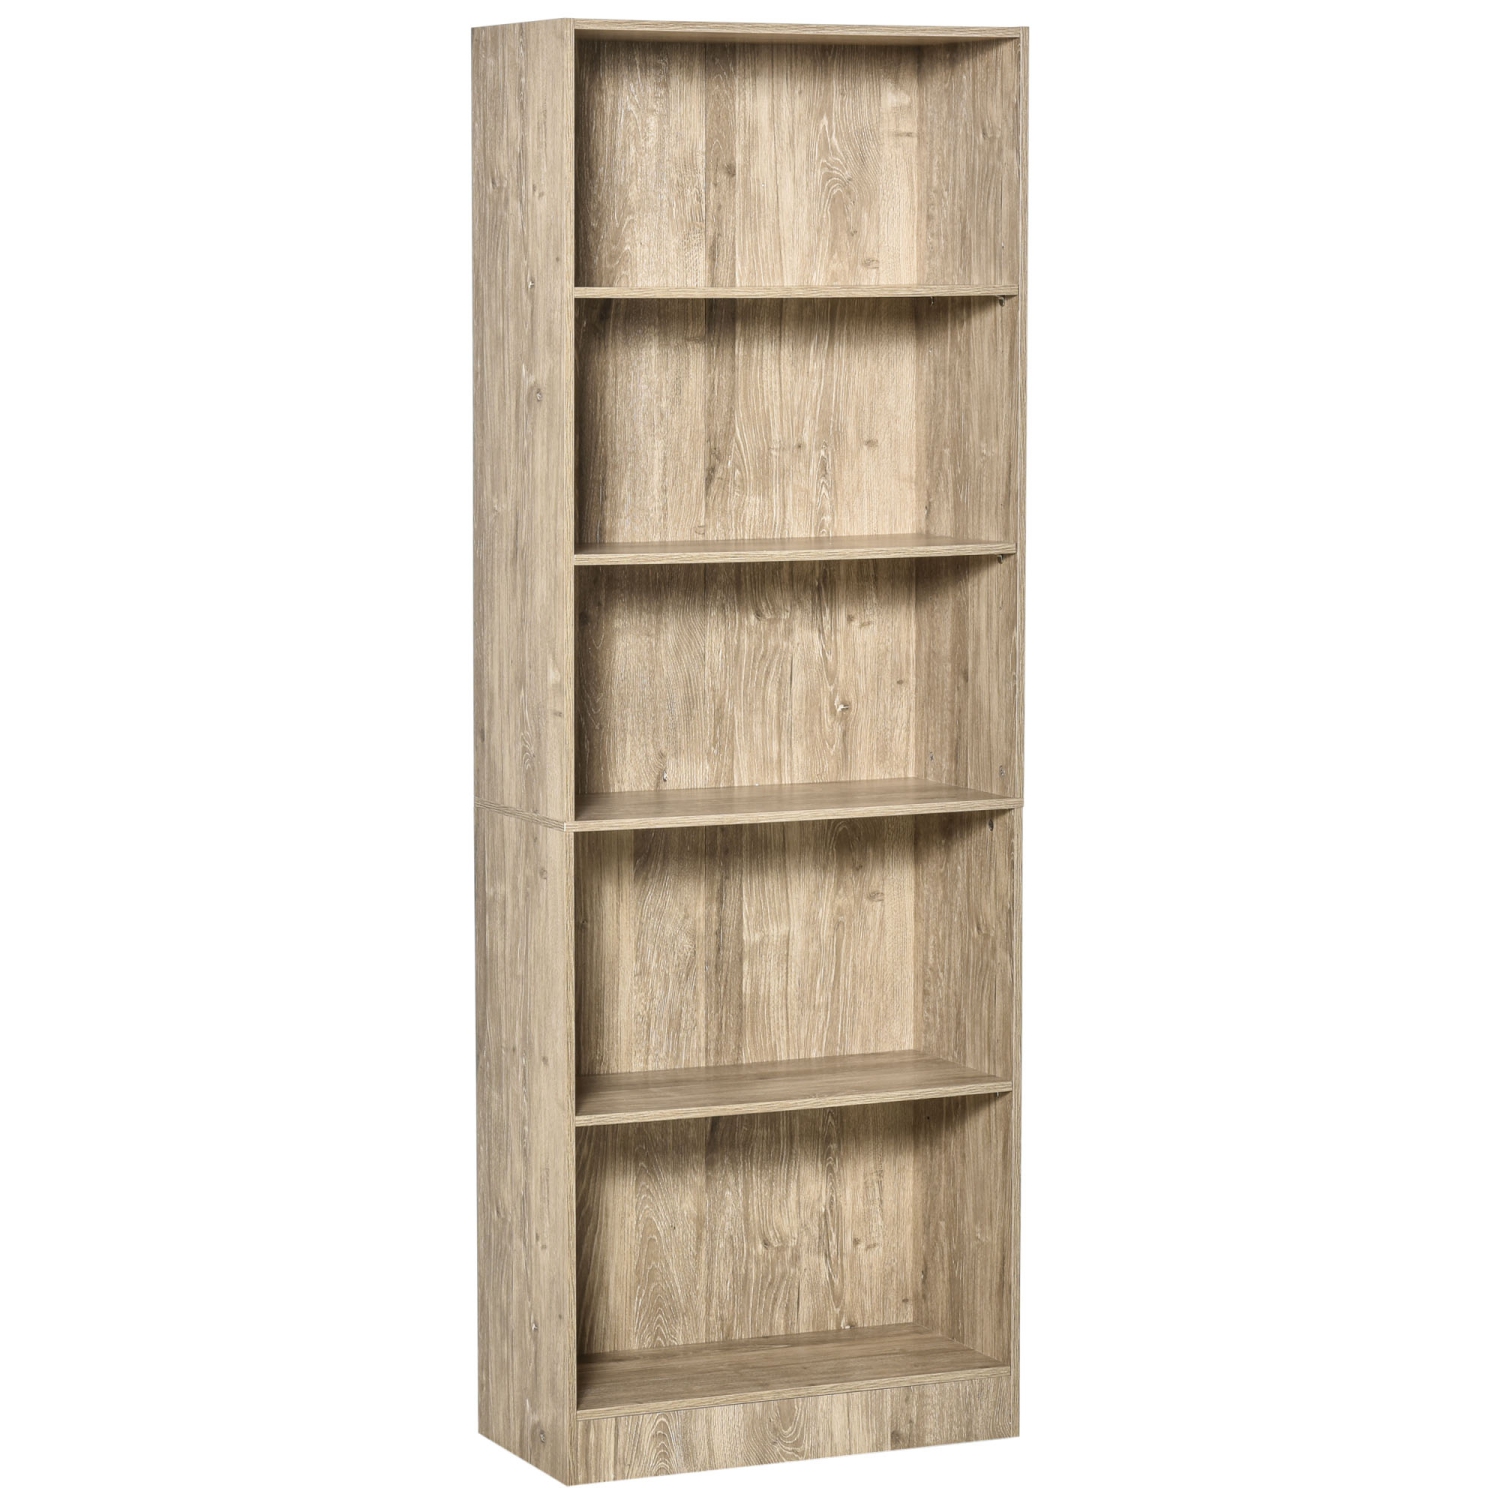 HOMCOM 5-Tier Bookcase Storage Cupboard with Adjustable Shelves Display Unit for Living Room, Office, Nature Wood